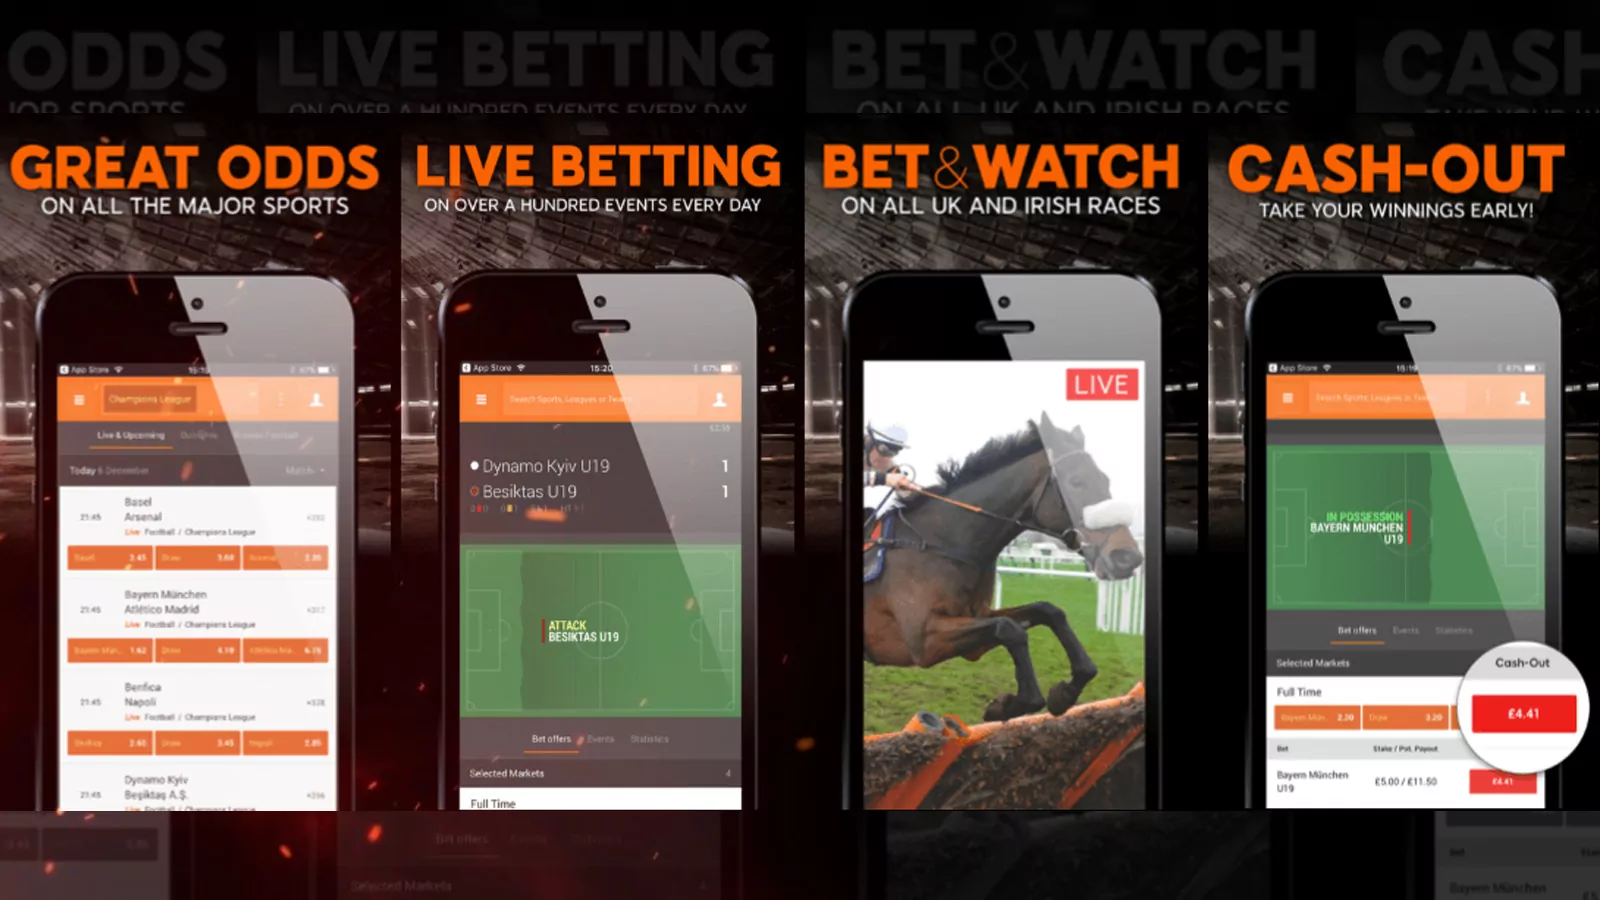 Install the well-known betting app and start placing bets on cricket.